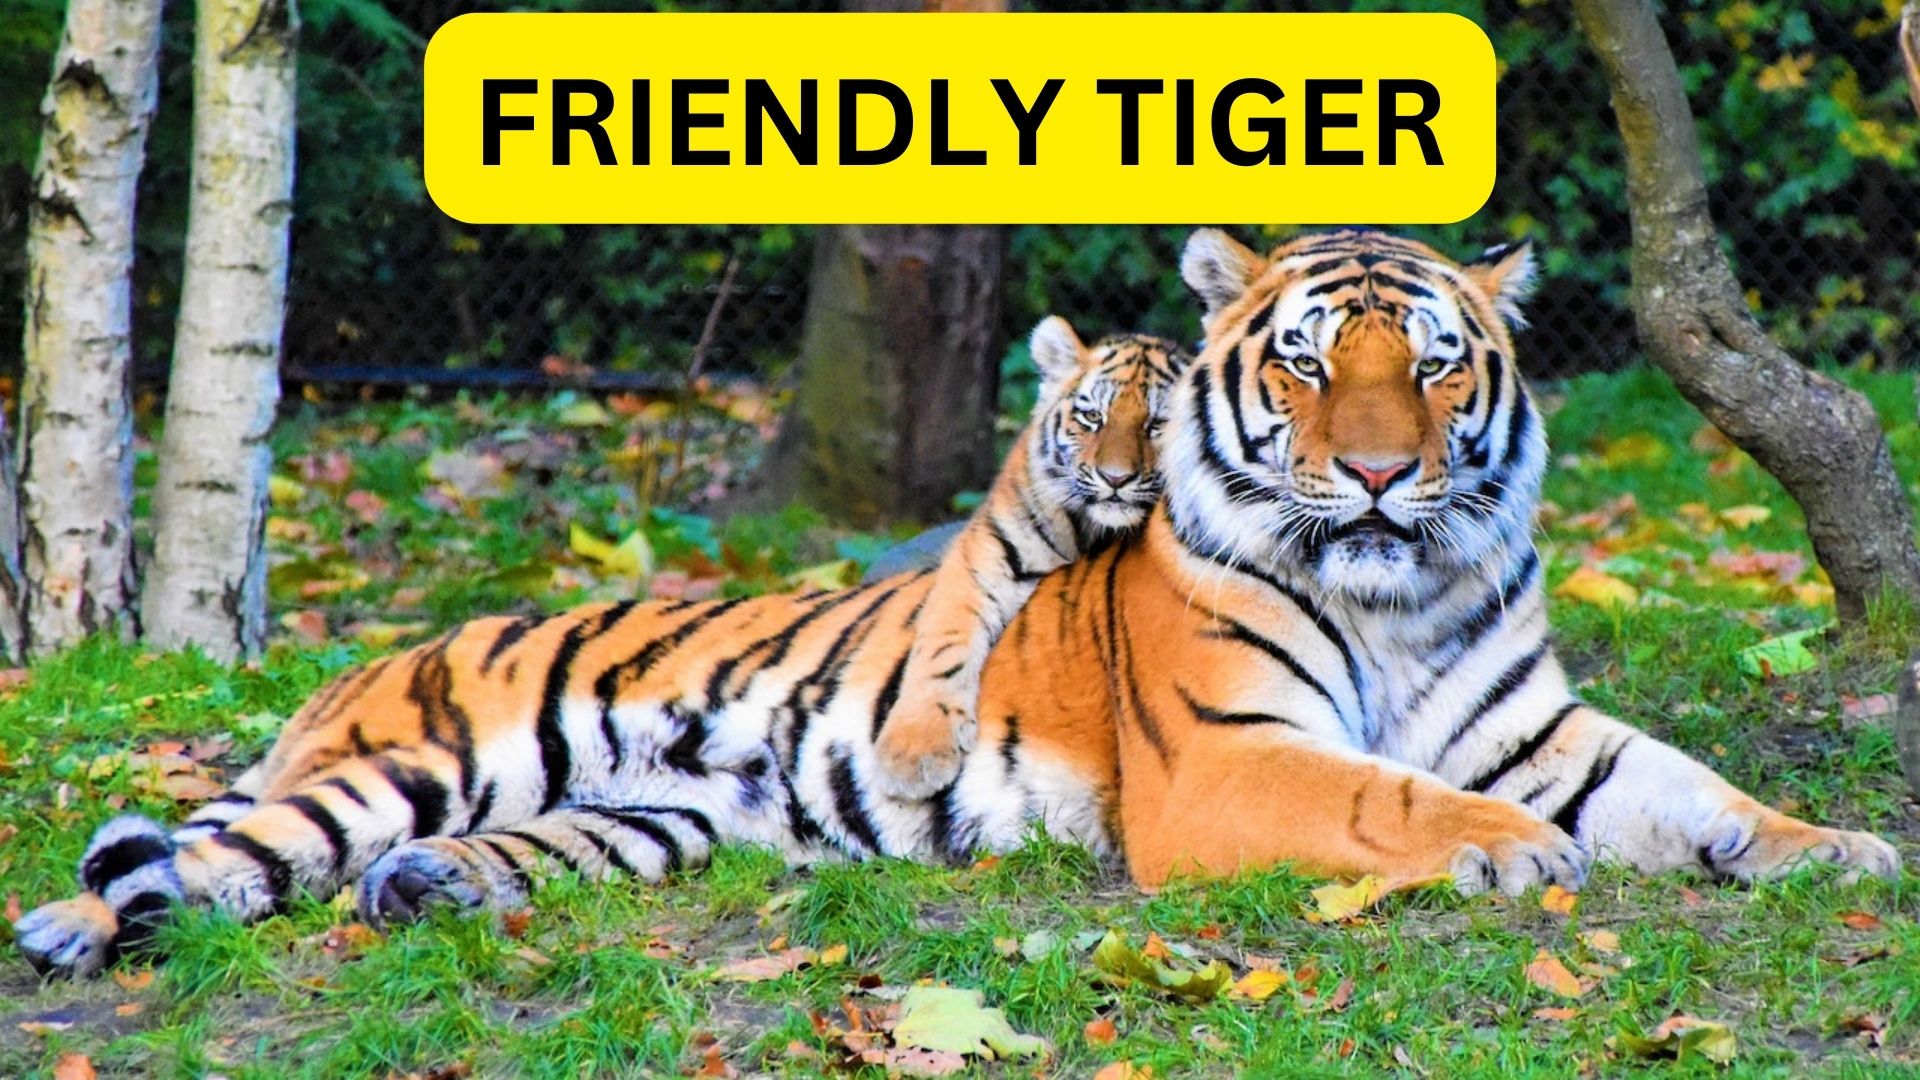 Friendly Tiger In Dream Represents An Incorrect Judgement